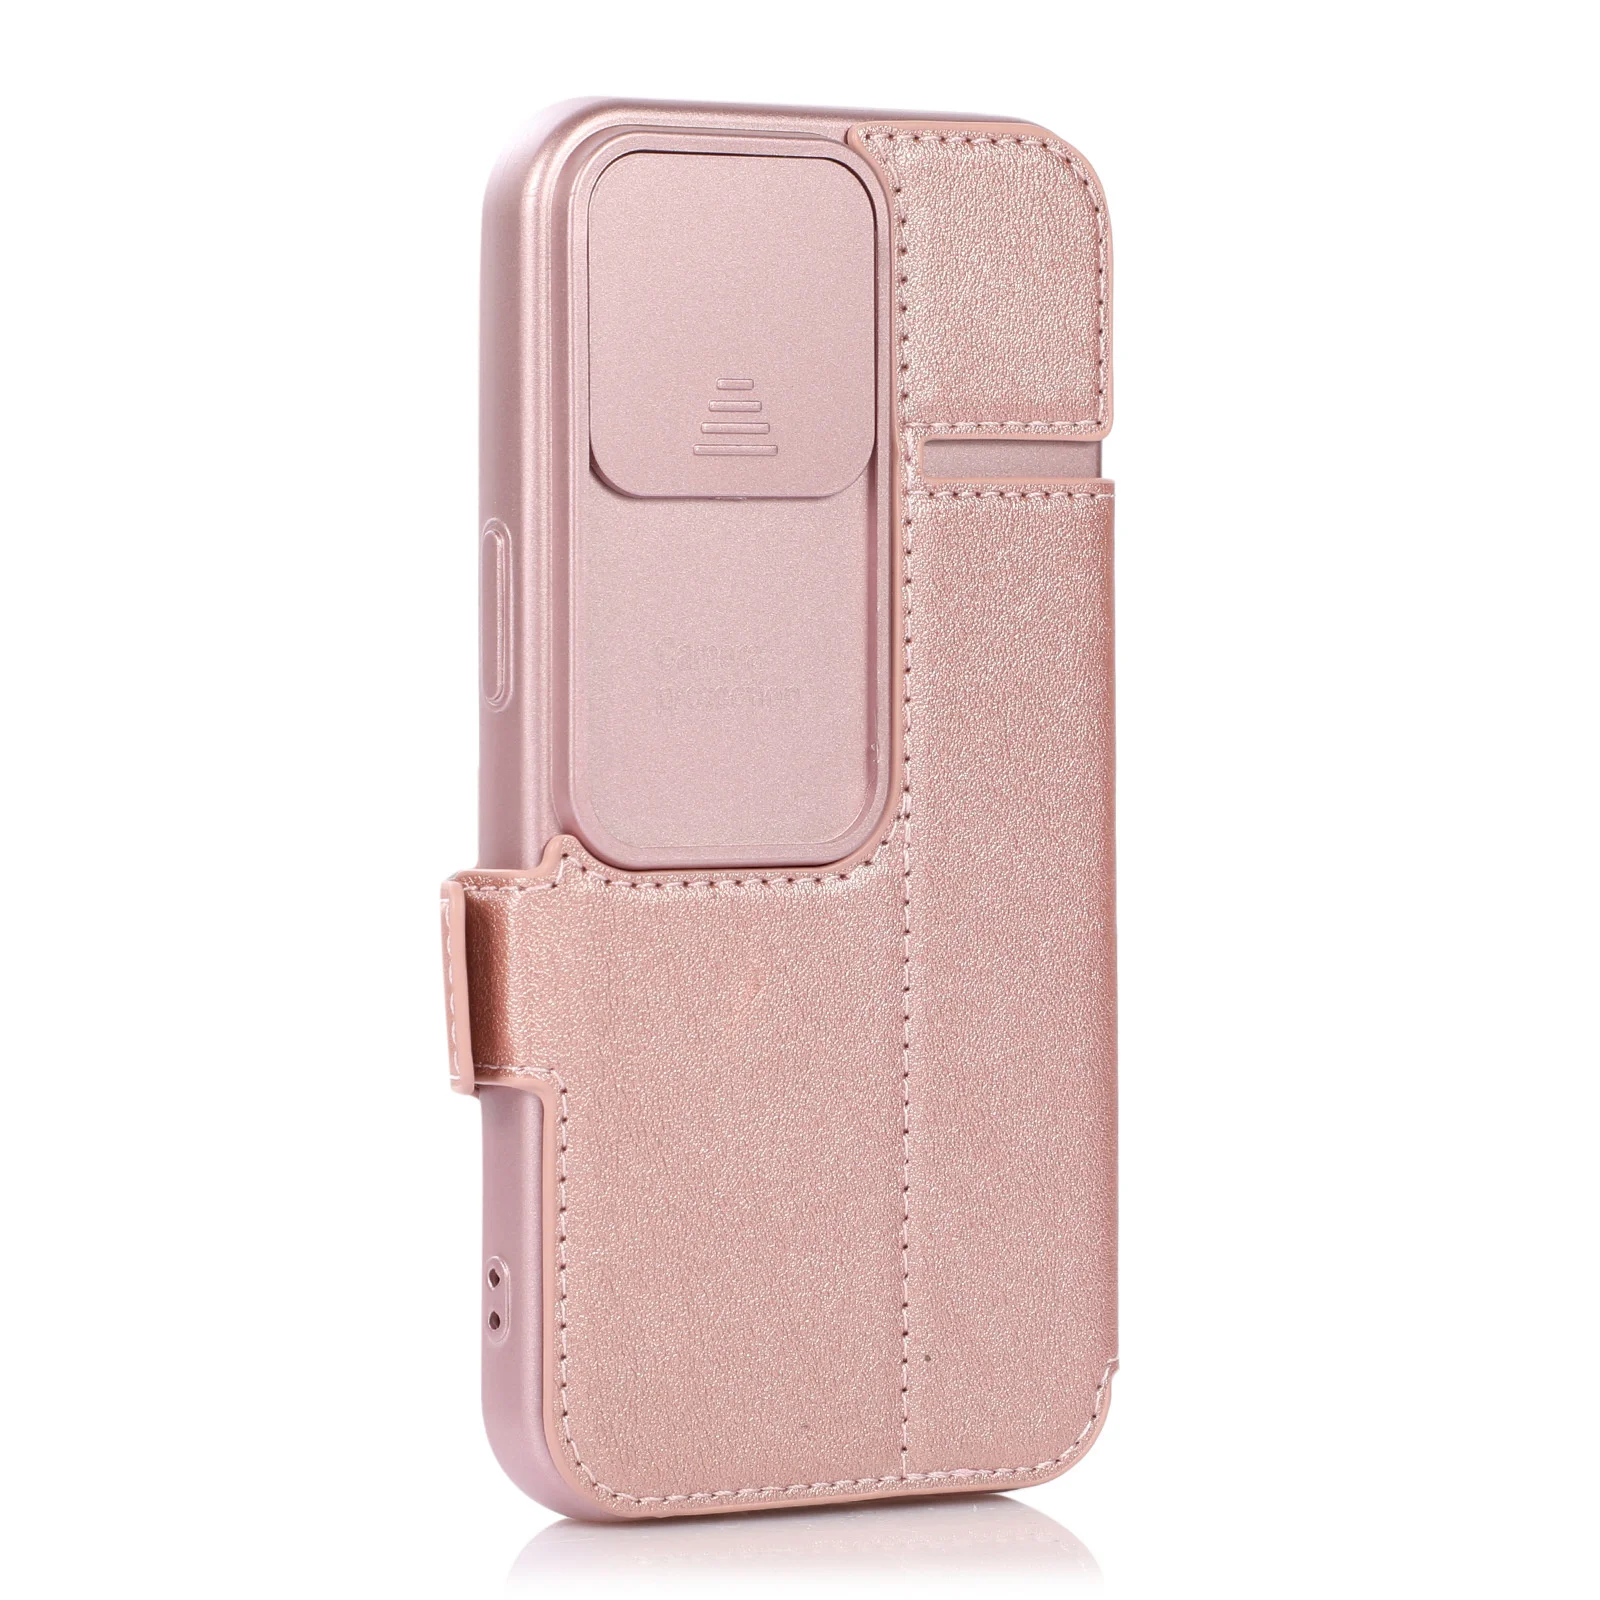 Phone Wallet Leather Case For Apple iPhone 13 12 Mini SE 11 Pro 7 8 6 6s Plus X Xs Max Xr Card Slot Back Cover Slide Camera Lens images - 6